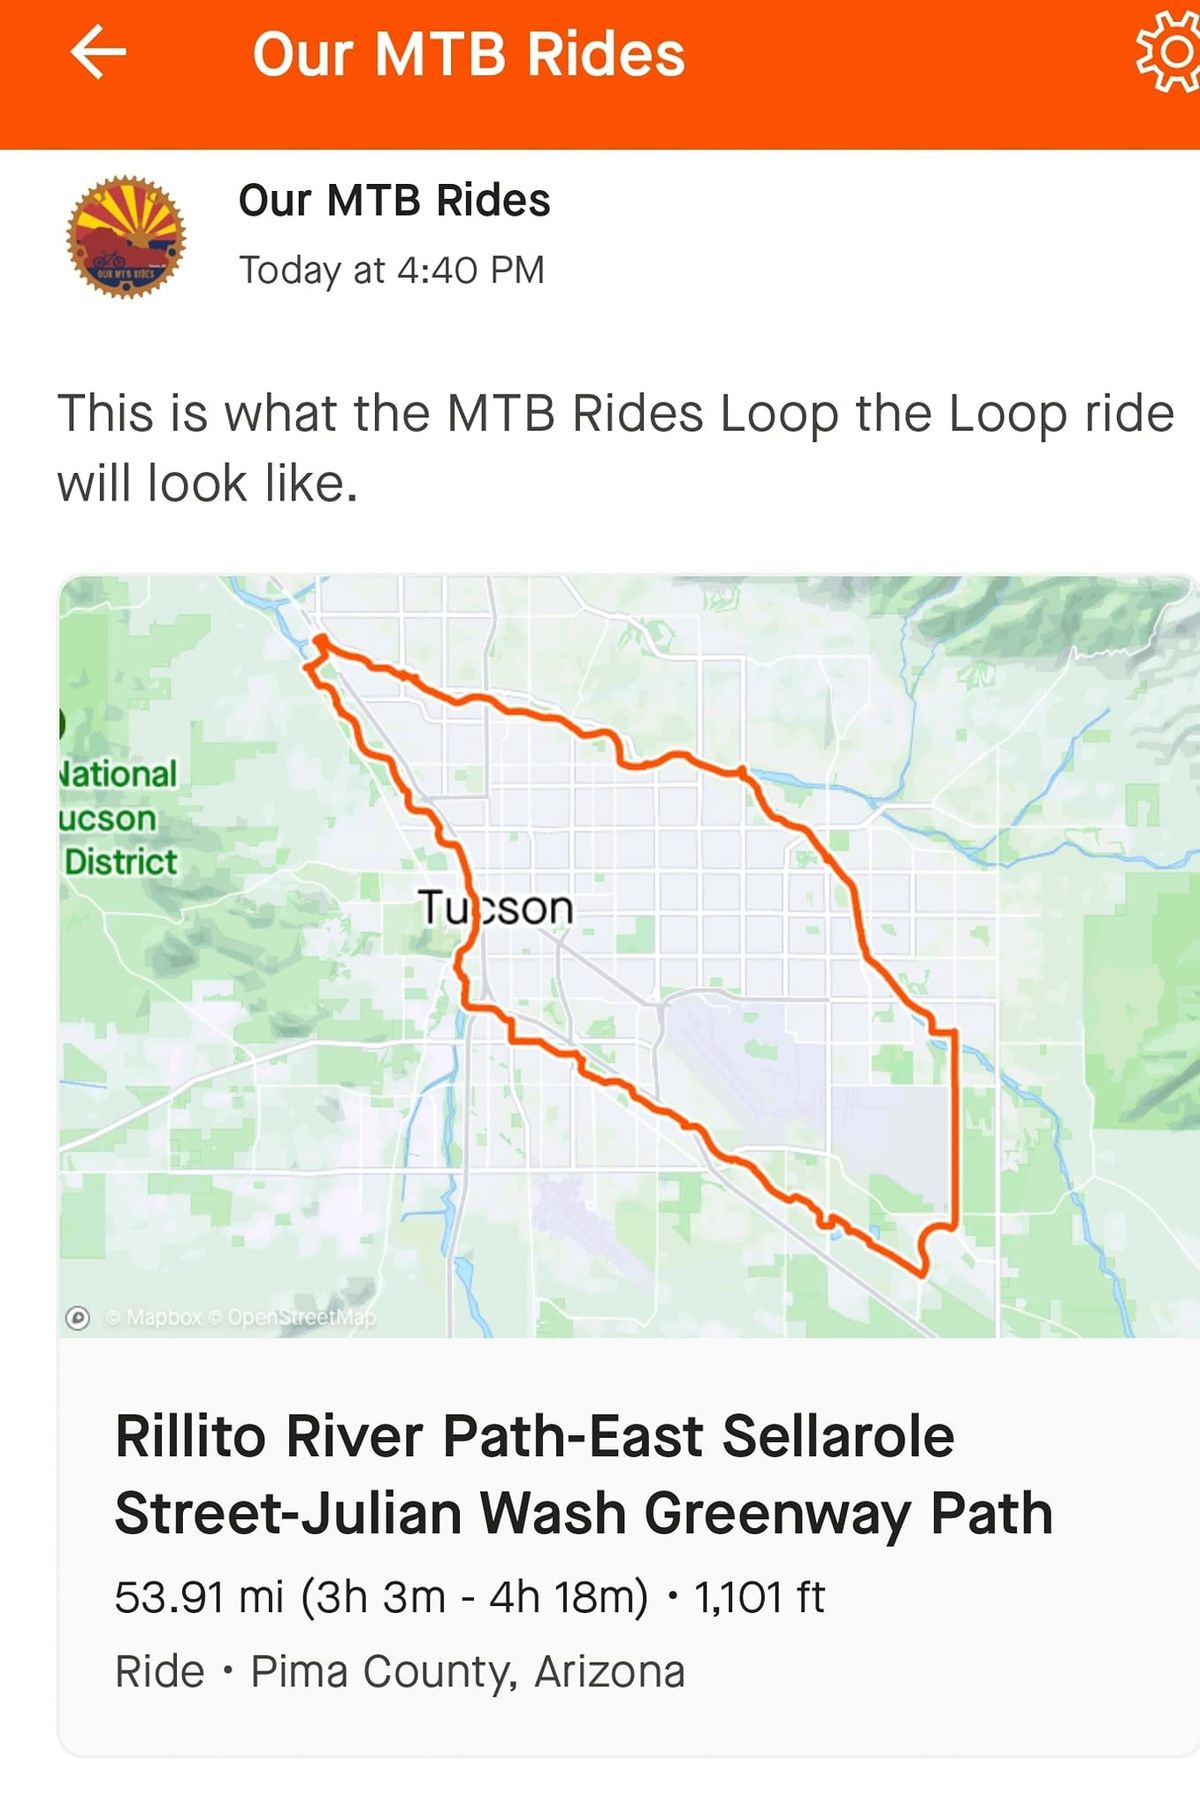 Sunday Ride: Our MTB Rides the Loop the Loop.